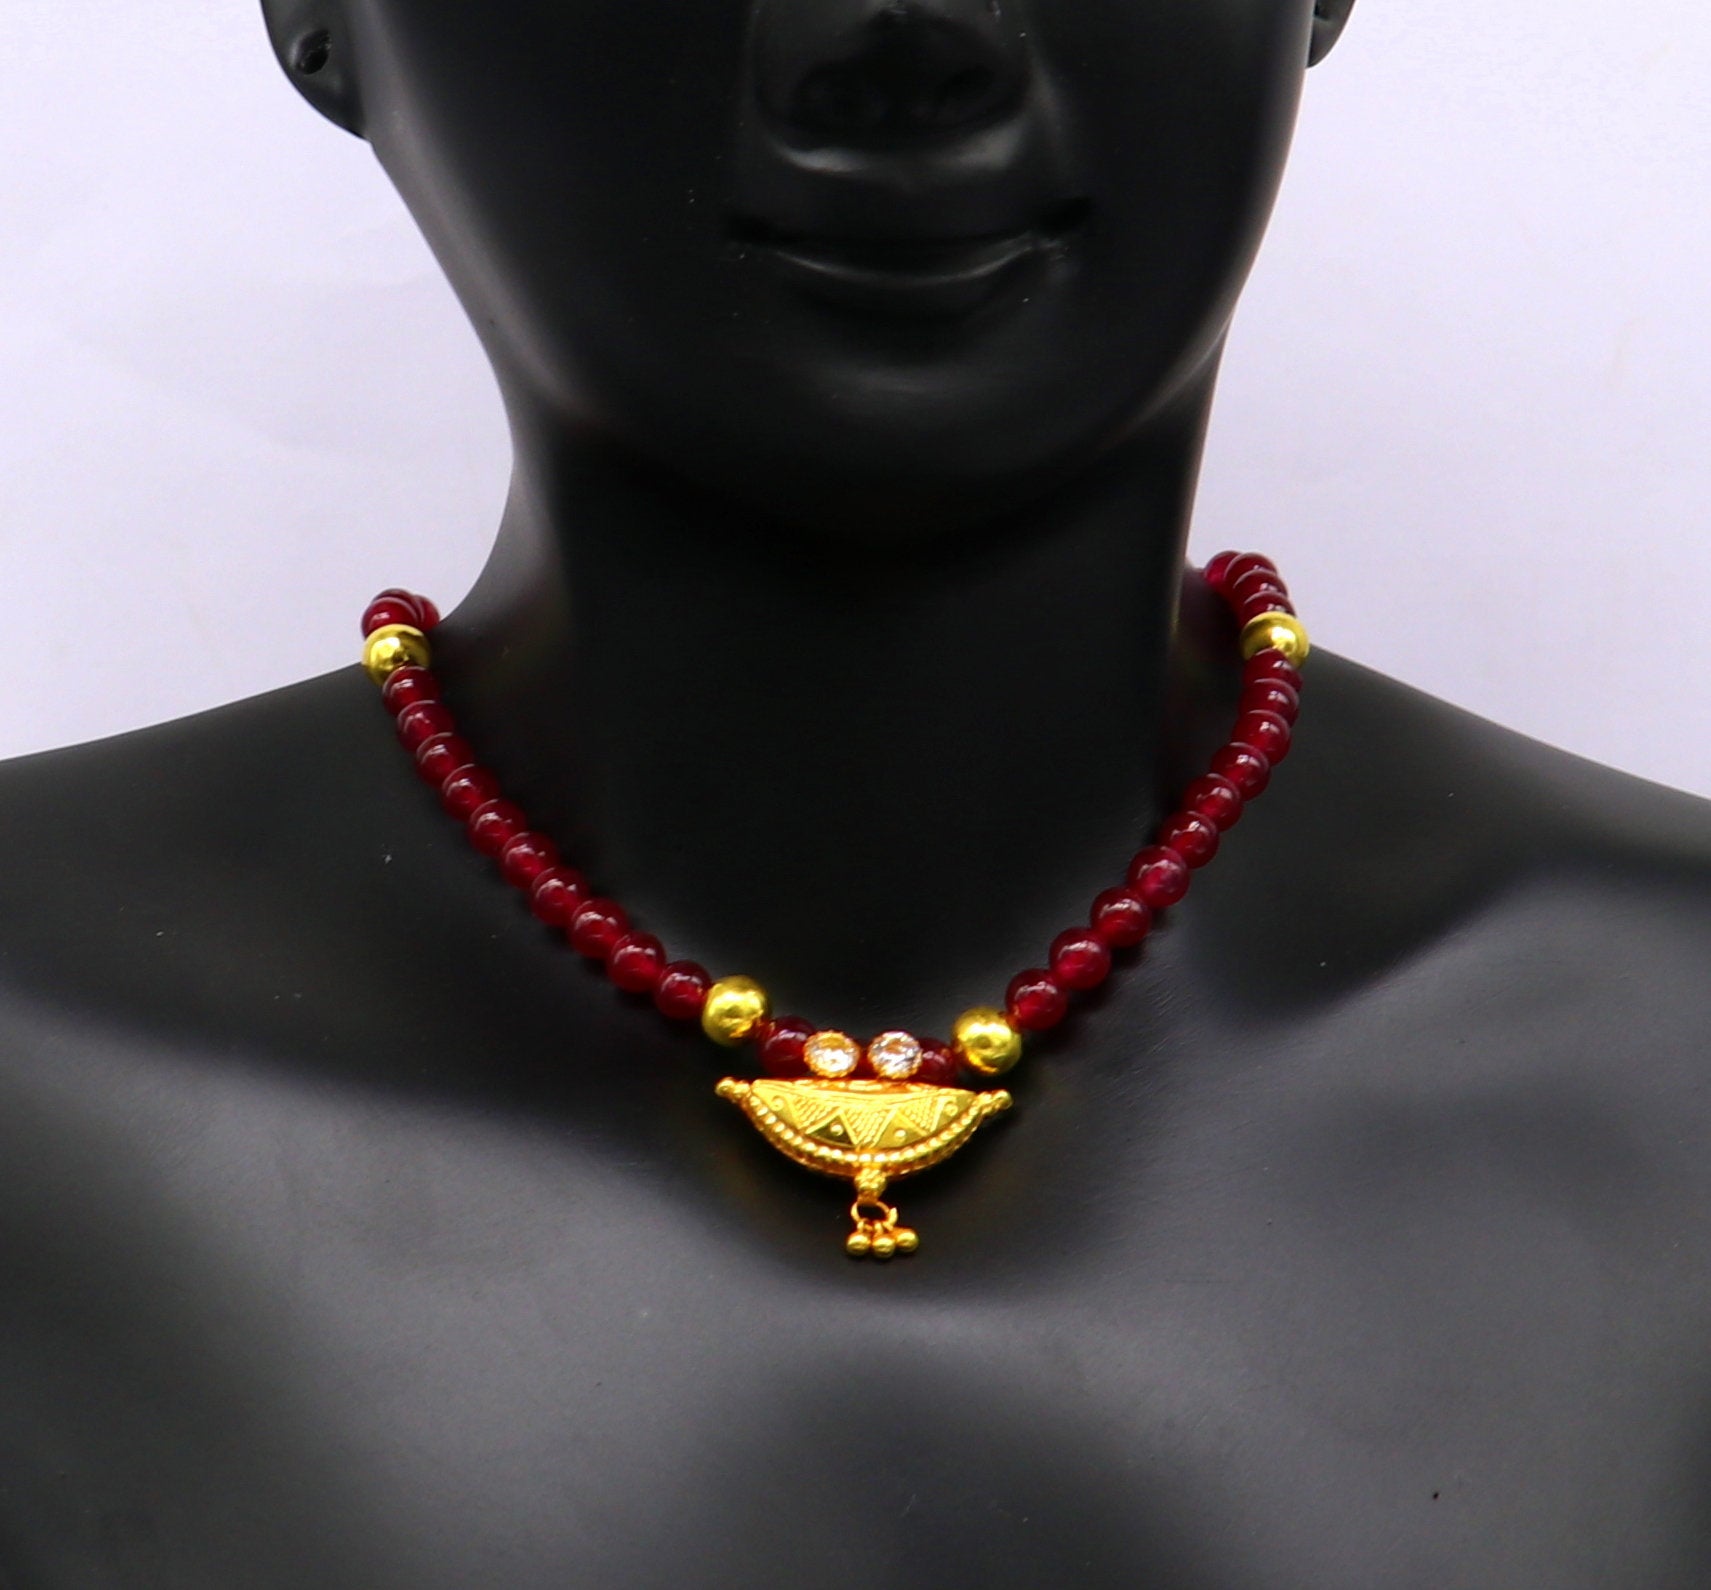 Vintage design handmade 20kt yellow gold amulet pendant with red color beaded necklace, fabulous girl's gift stylish tribal jewelry ap02 - TRIBAL ORNAMENTS